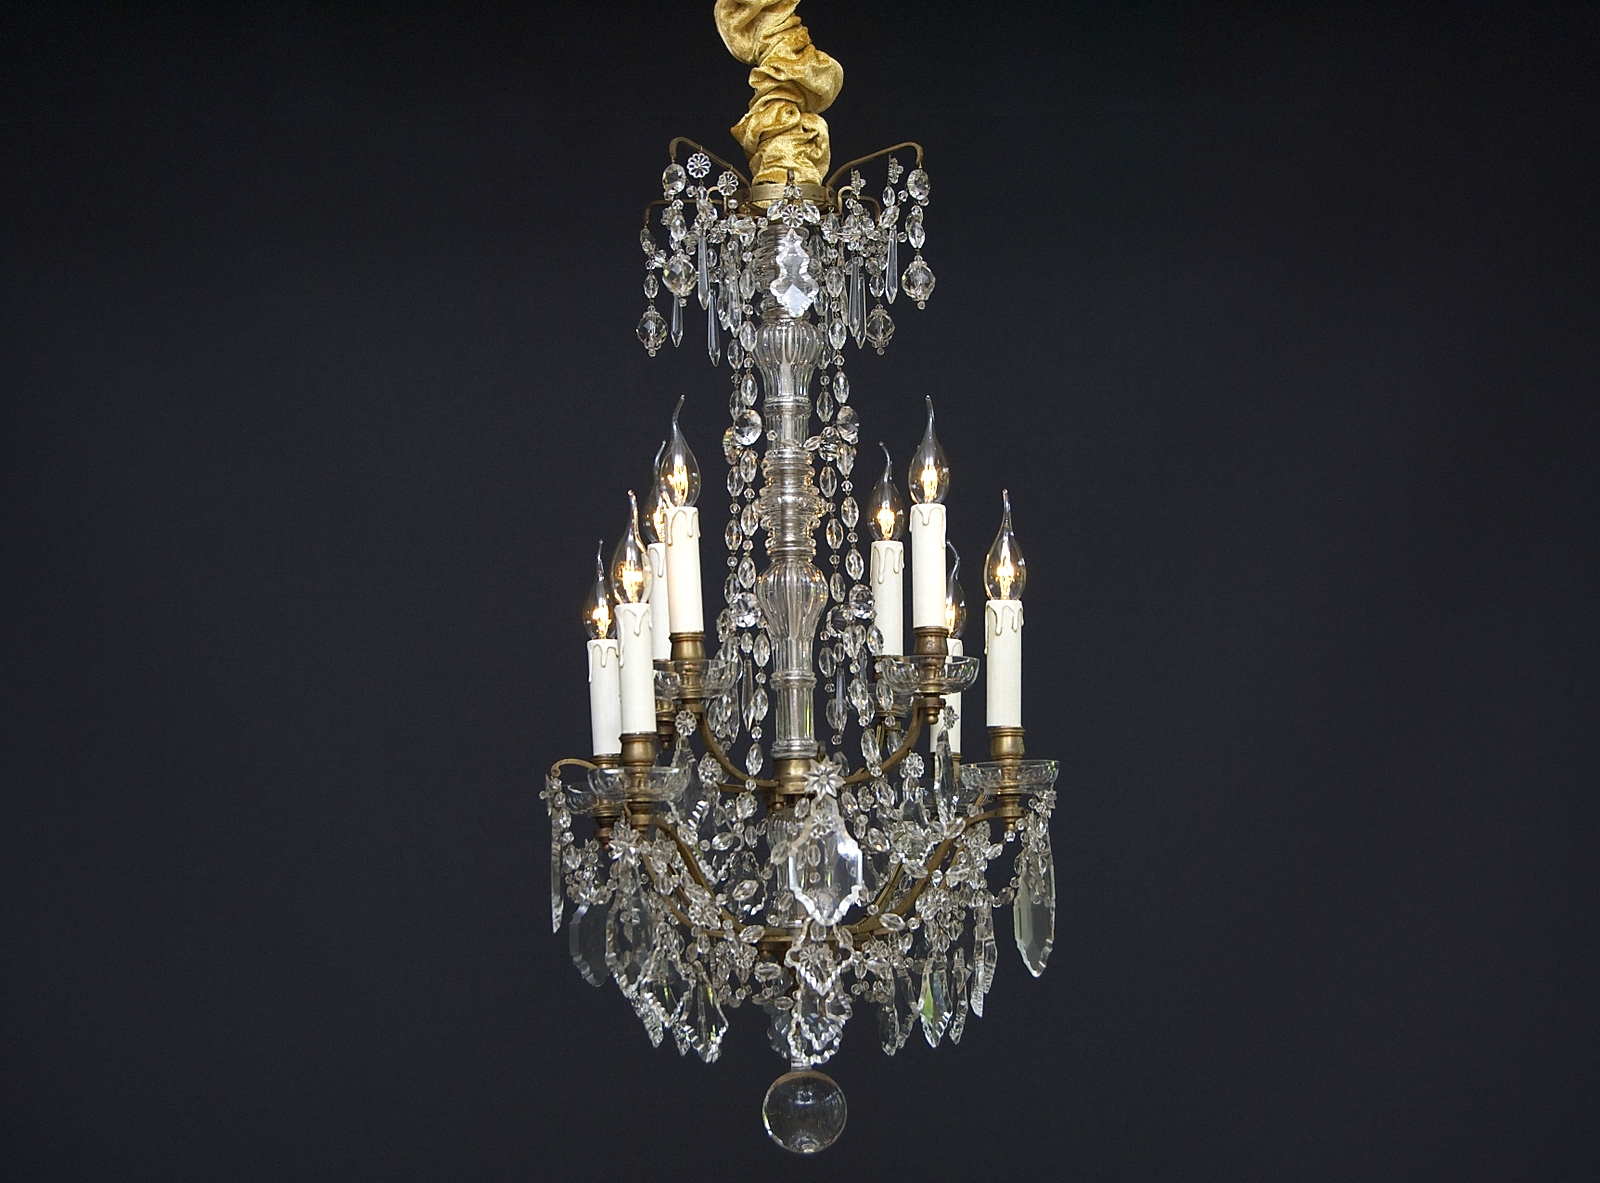 Antique French chandelier with 8 light